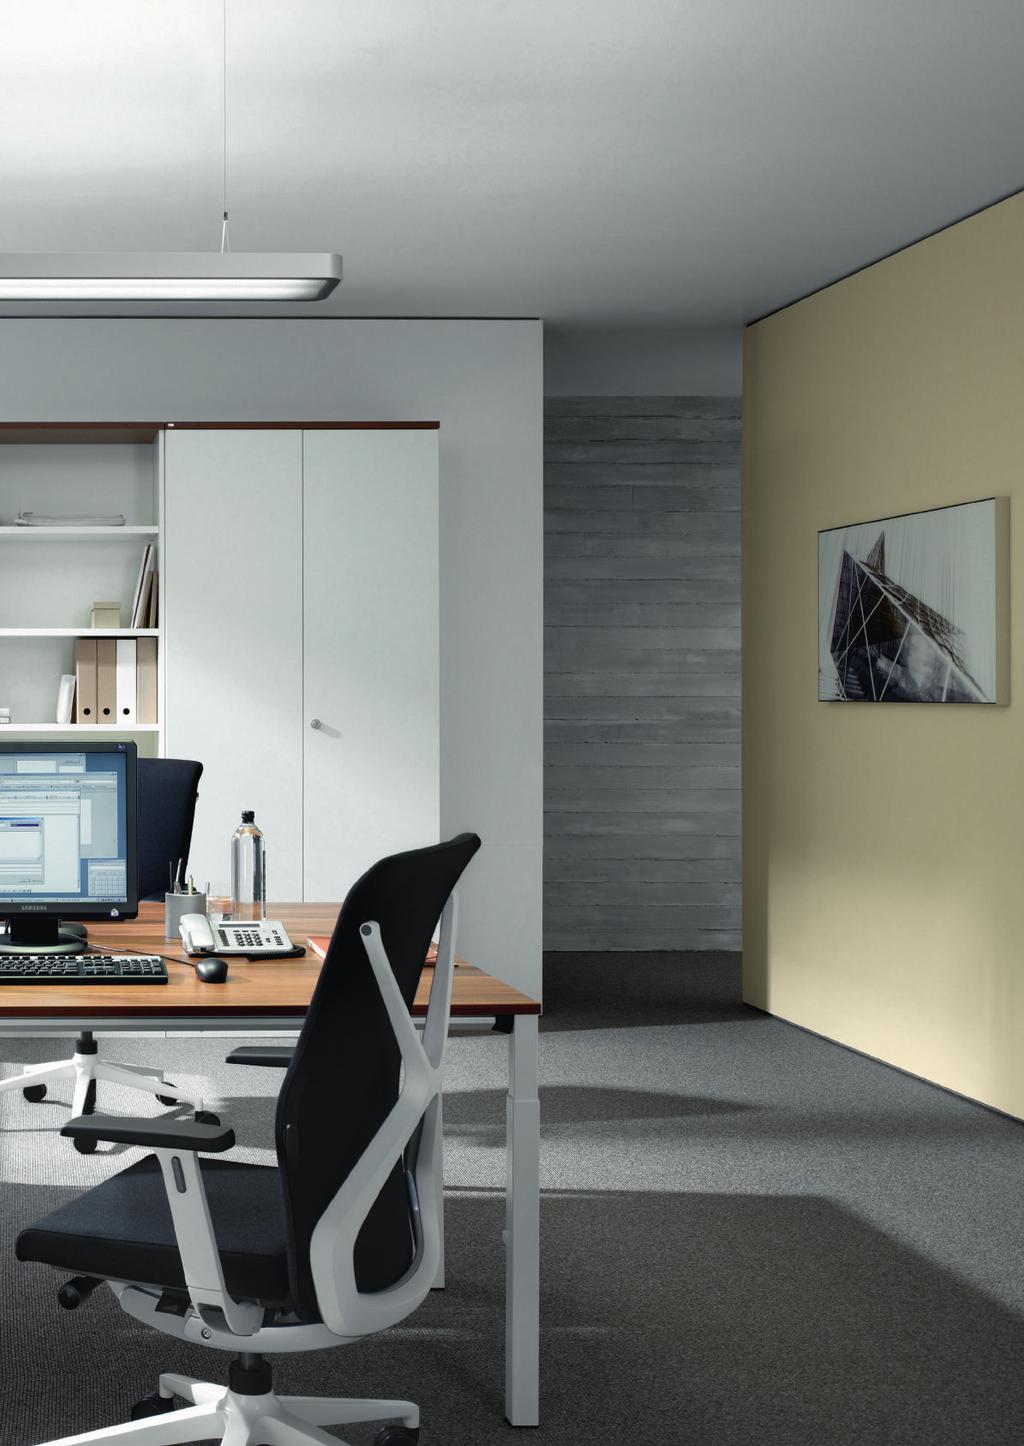 BUSINESS IN FOCUS 3 Written by Leon Bracey When designing office space, lighting can be a significant factor in the productivity and well-being of workers.